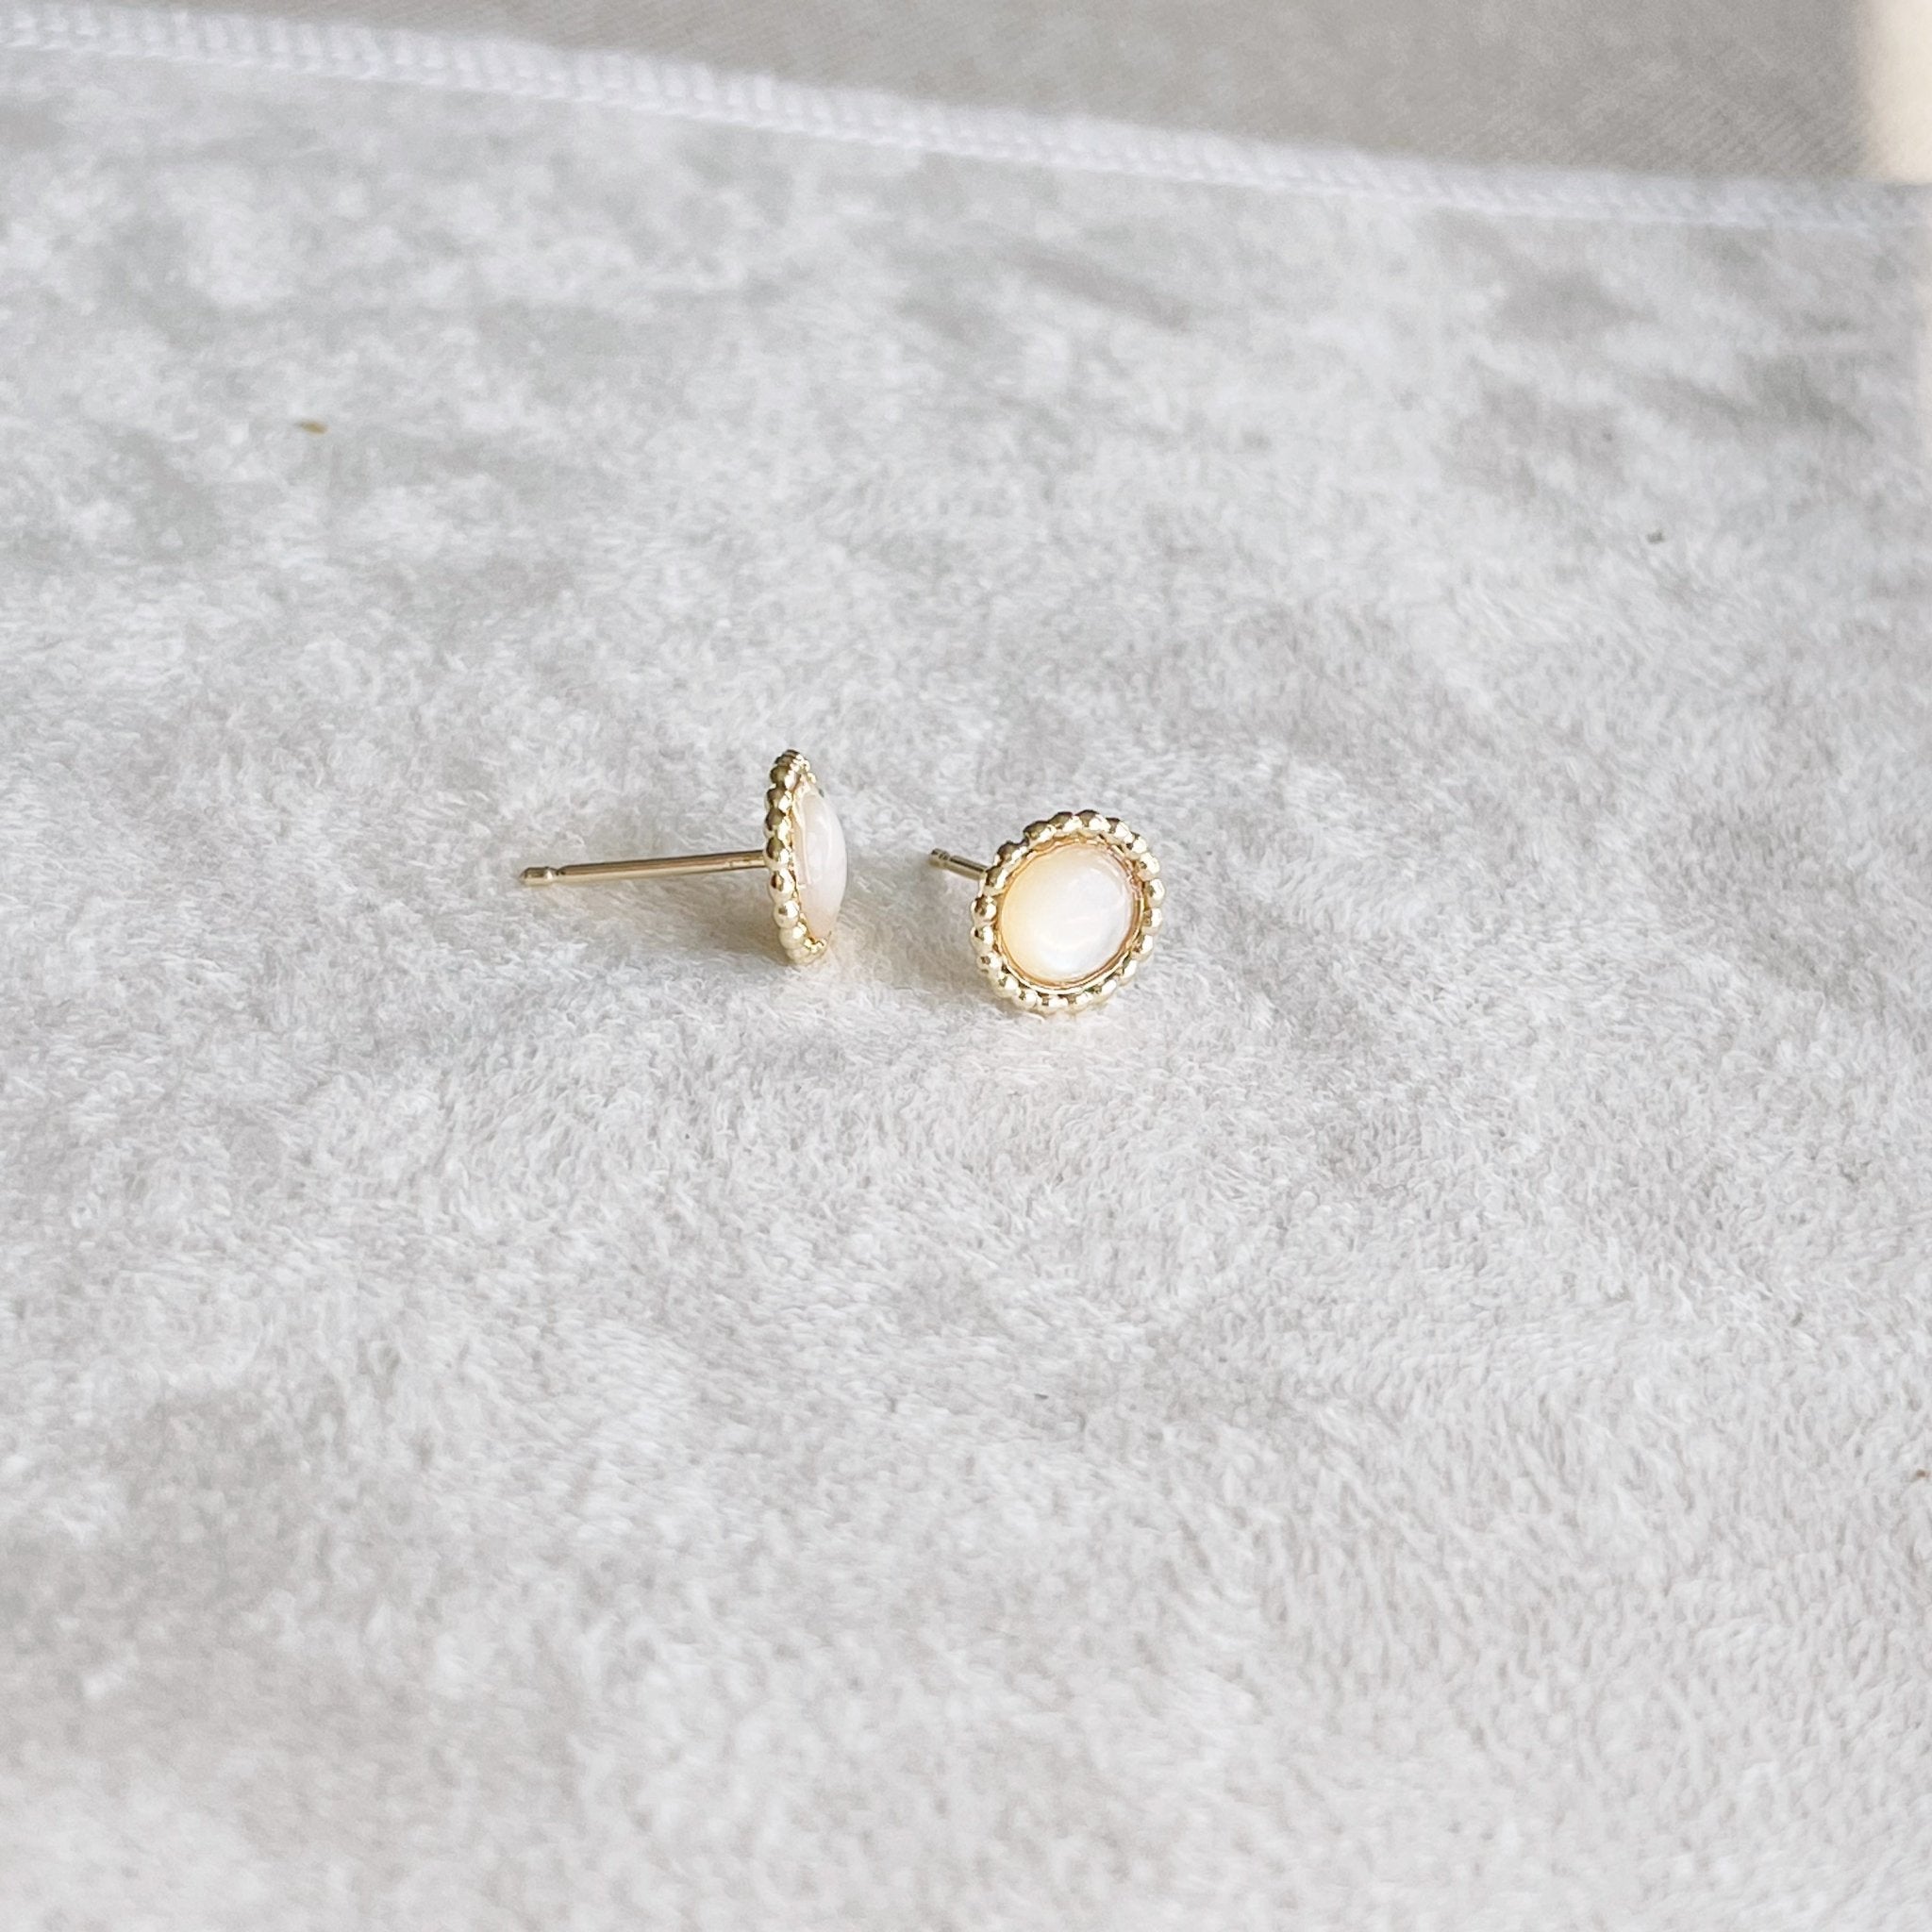 Pair of 6mm gold and mother of pearl stud earrings with a beaded bezel setting. Chantilly Studs by Sarah Cornwell Jewelry